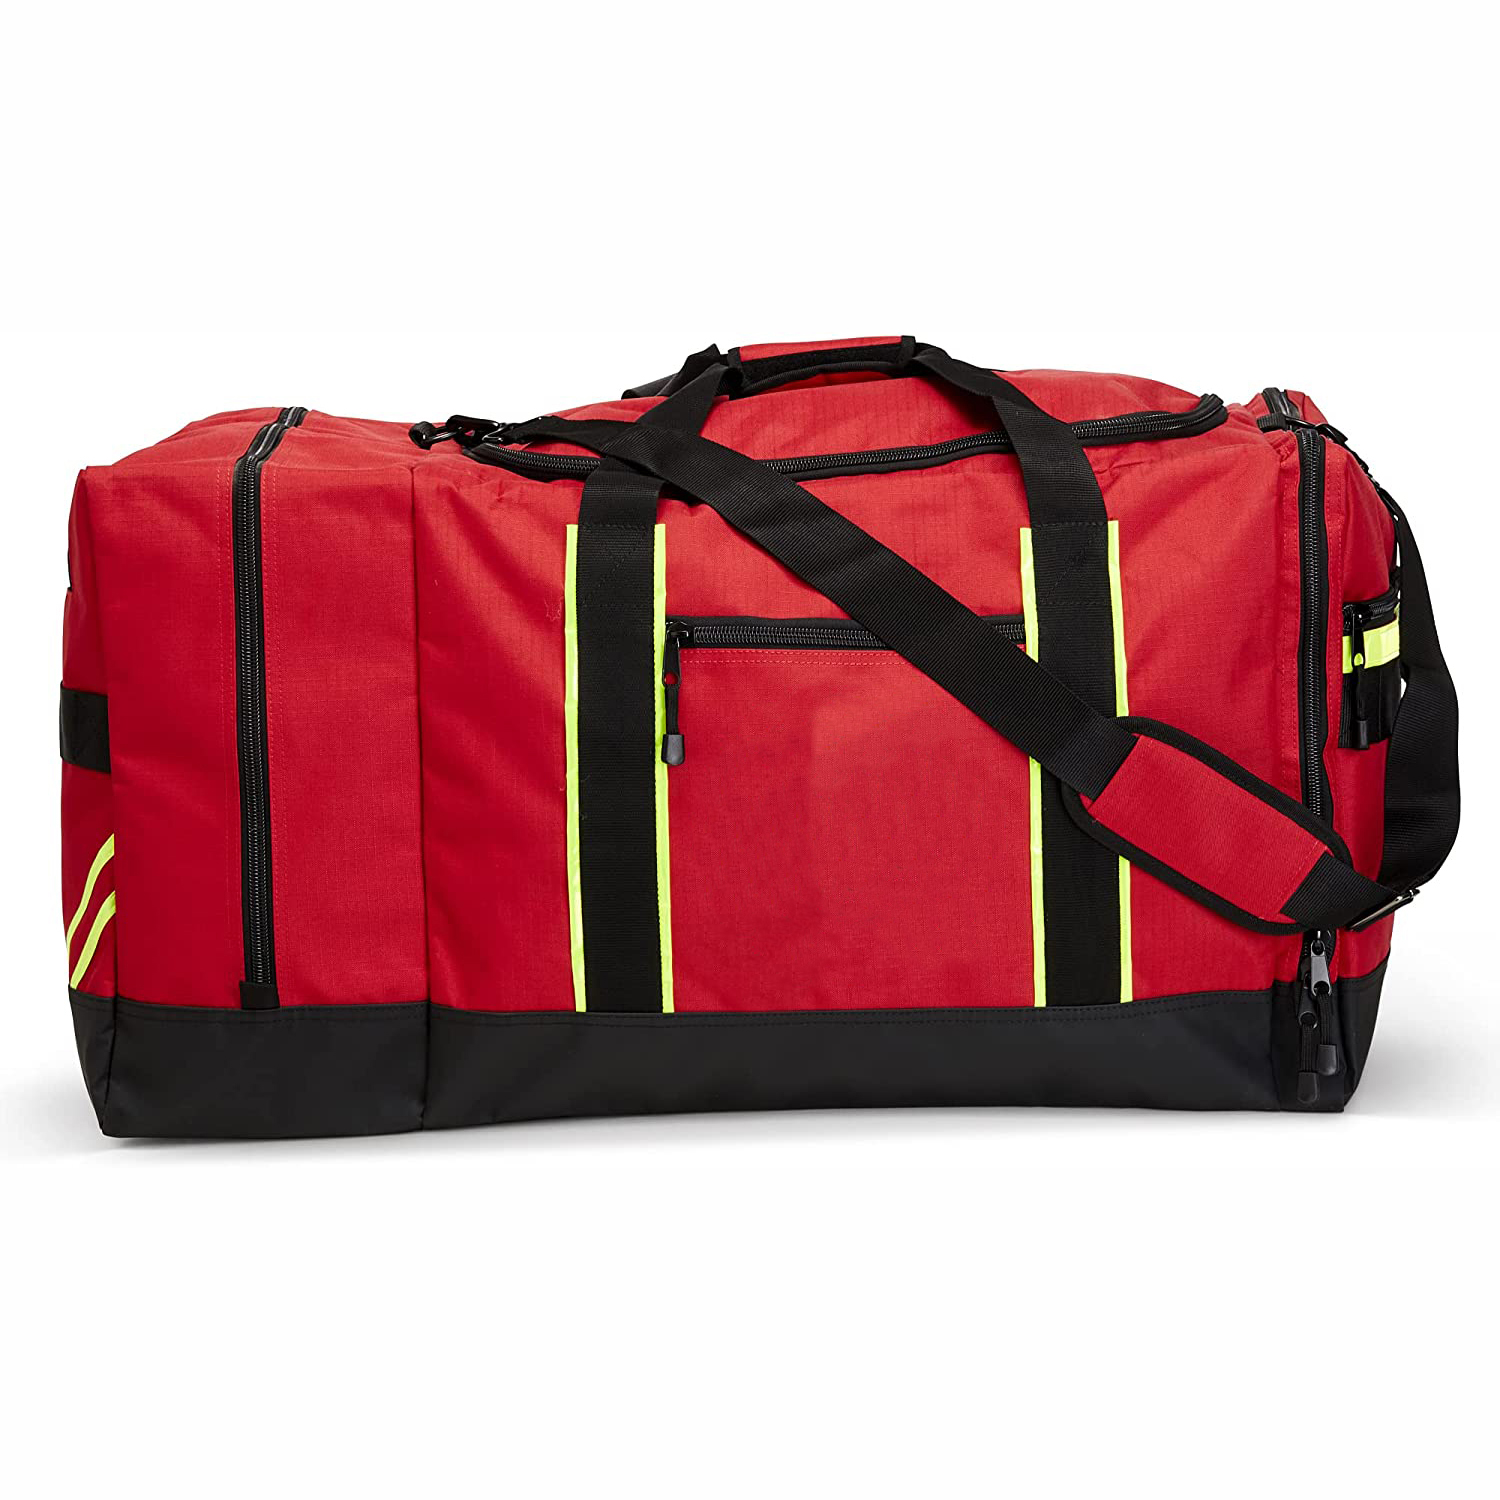 Firefighter Turnout Gear and Safety Duffel Bag for Fire Large Fall Protection